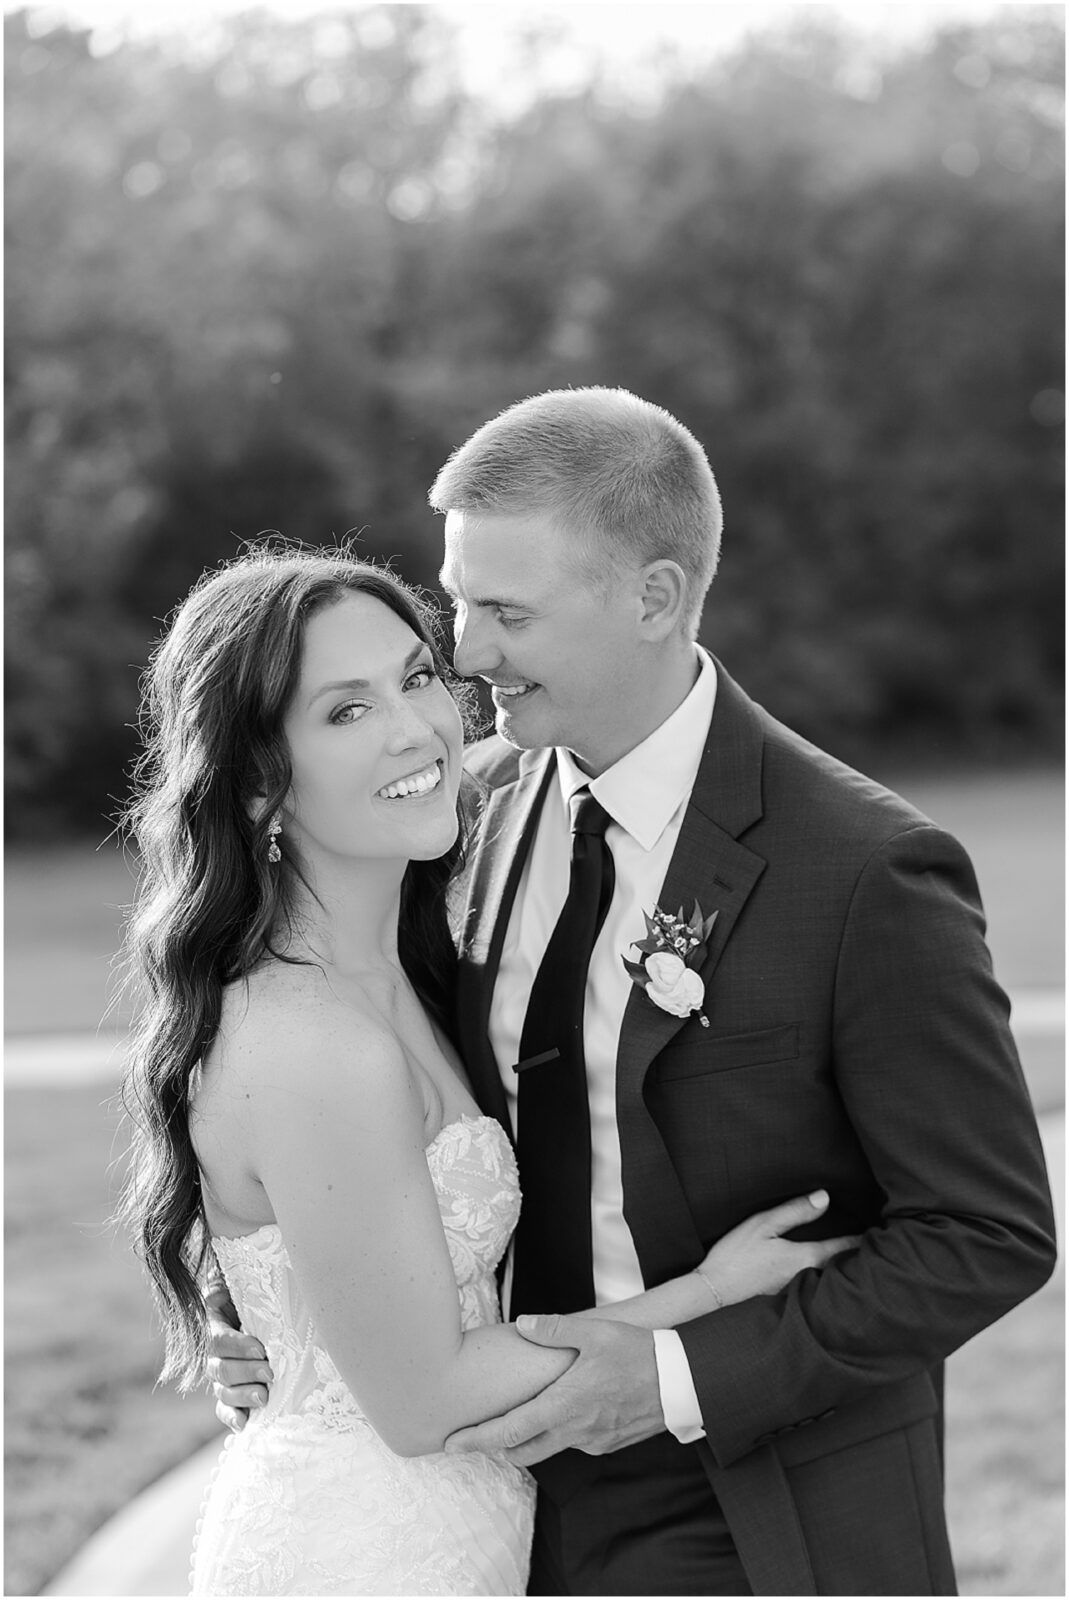 Sunset Photos | Beautiful Photo Ideas for Weddings | Outdoor Wedding Venue in Kansas City | Farms at Woodend Springs | KC Wedding Photography